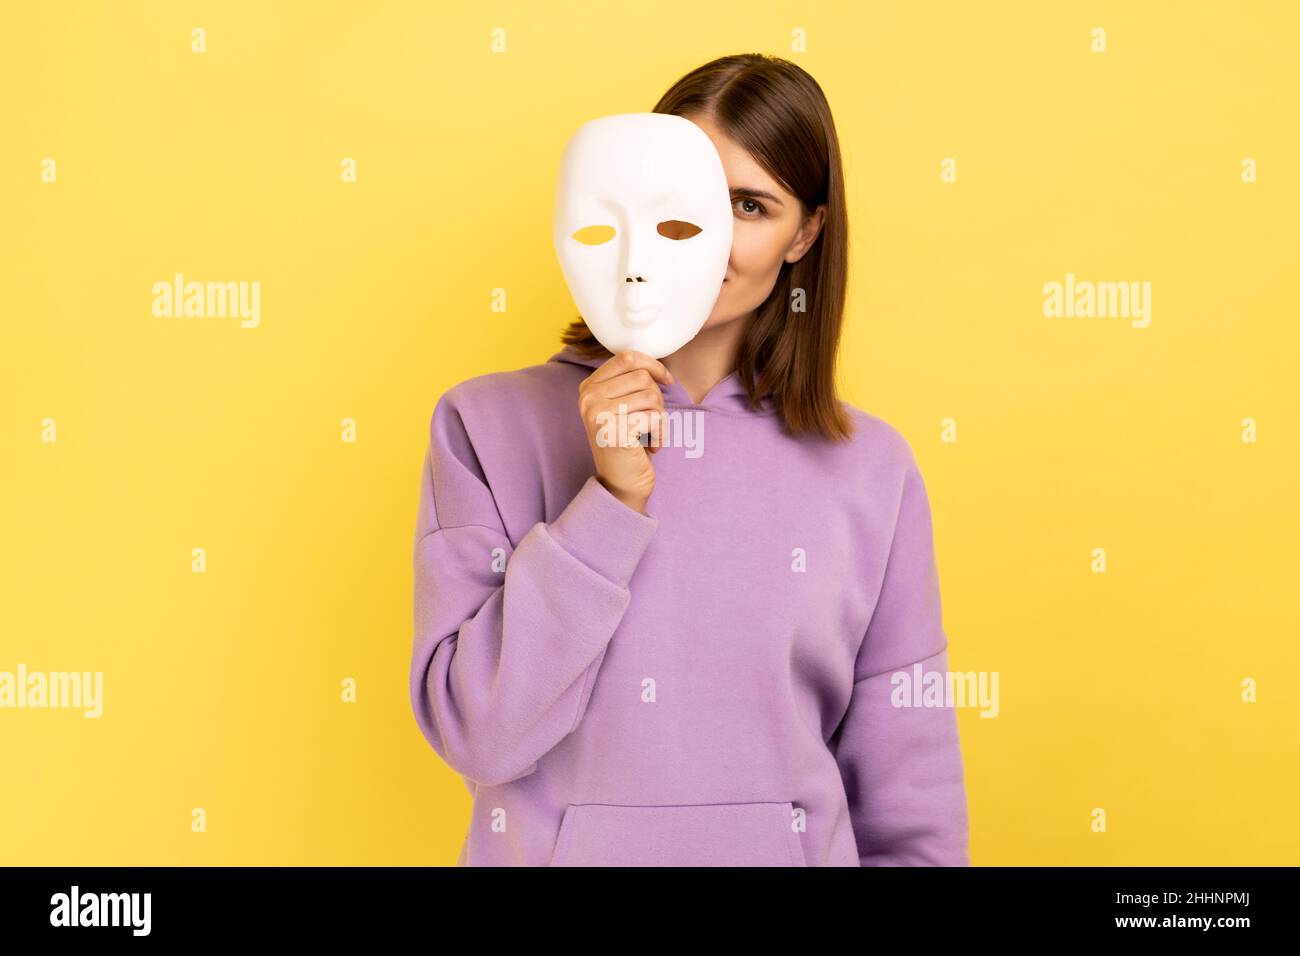 Woman with dark hair removing white mask from face showing his smiling expression, good mood, pretending to be another person, wearing purple hoodie. Indoor studio shot isolated on yellow background. Stock Photo